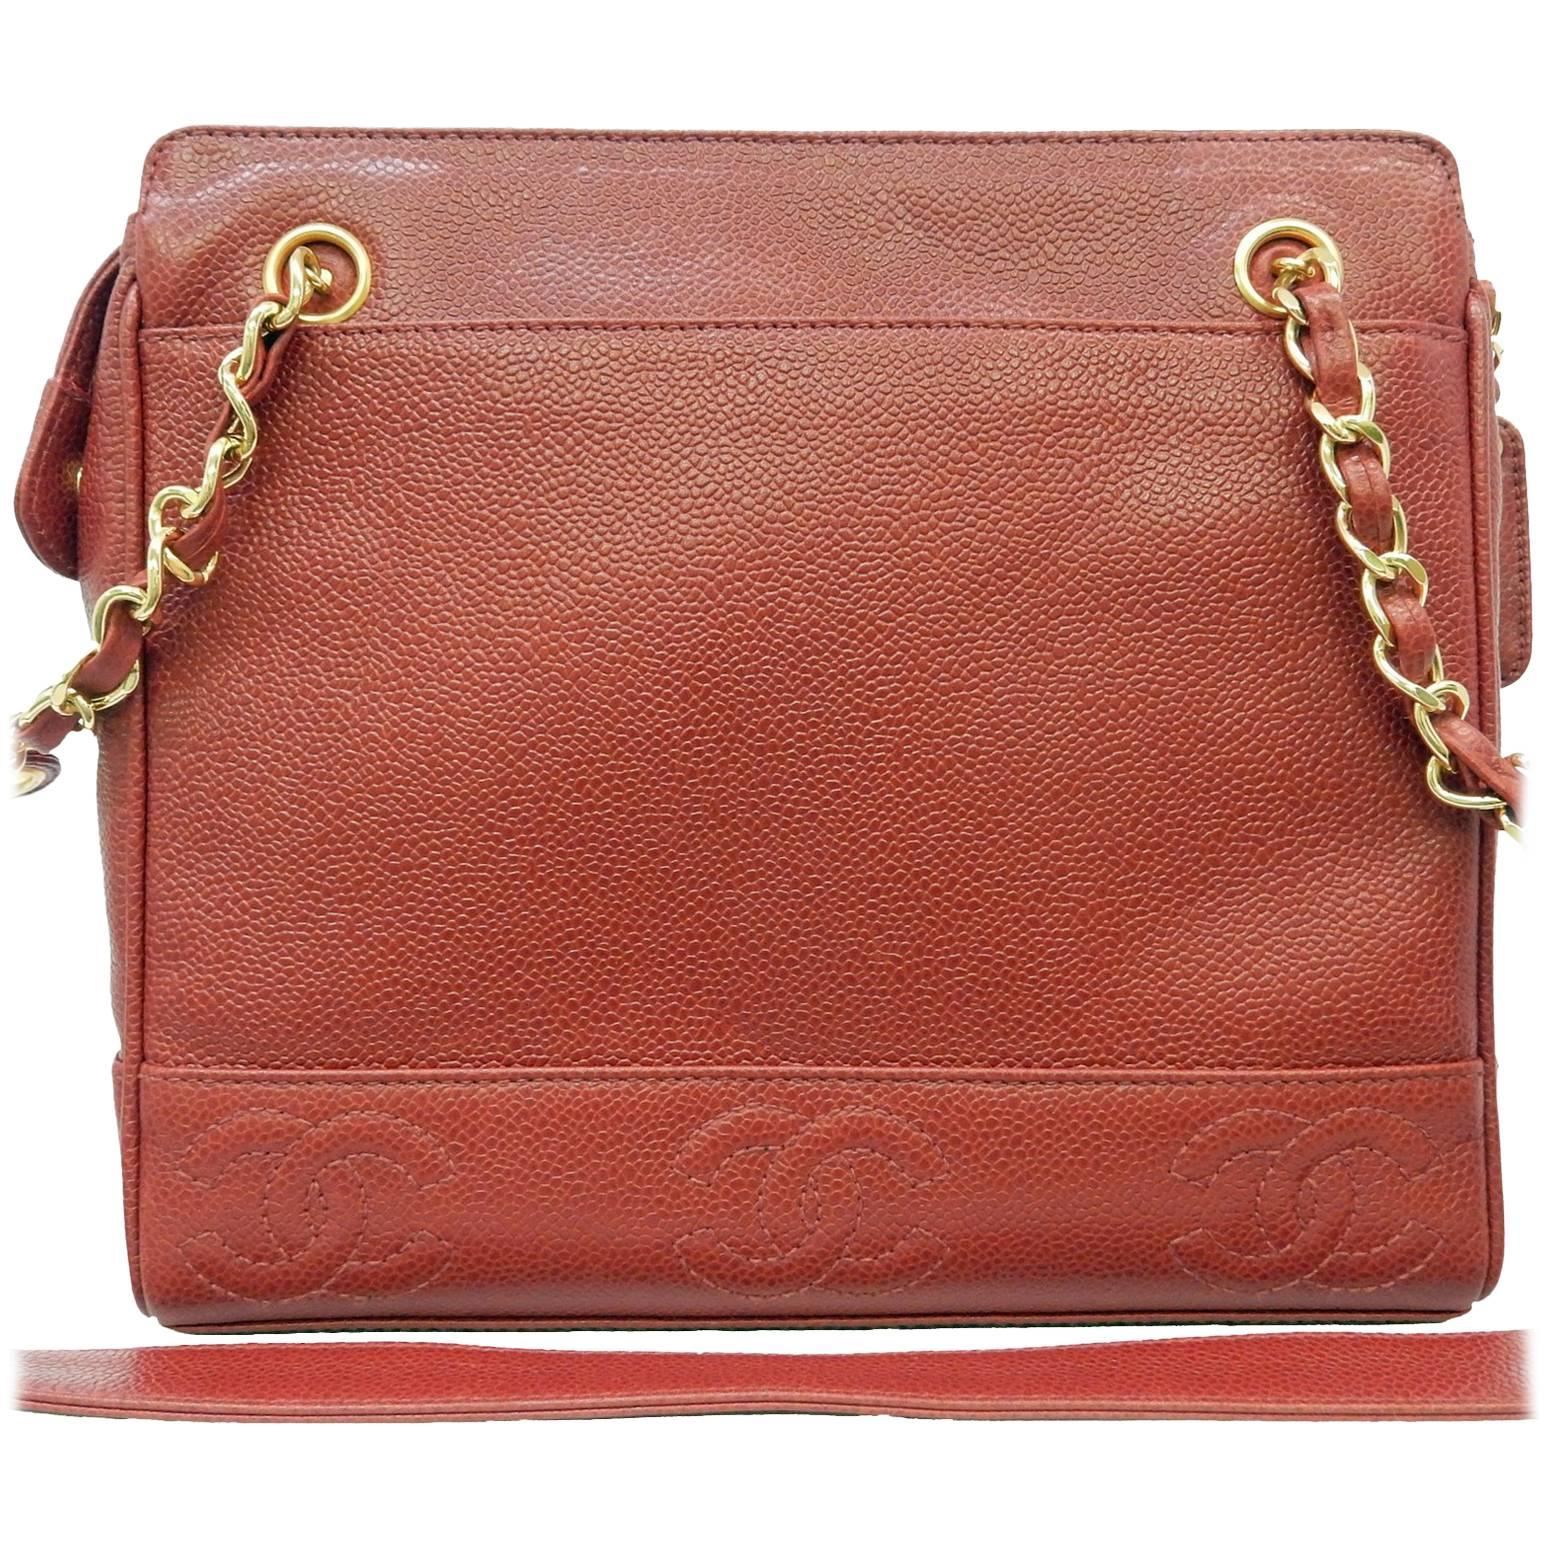 Chanel Red Caviar Leather "CC" Tote Shoulder Bag